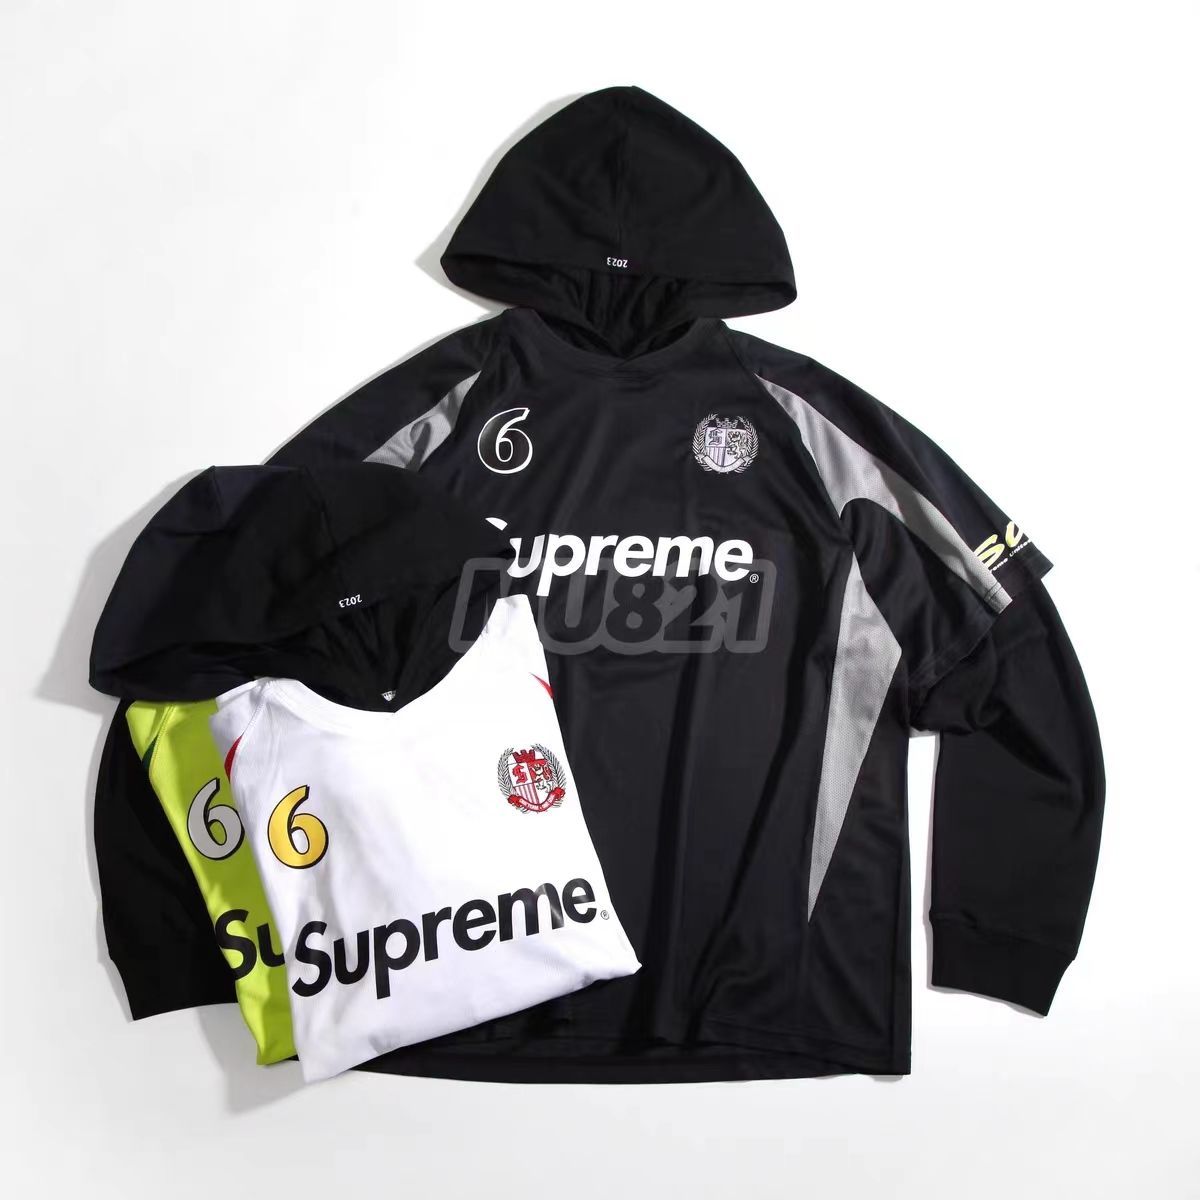 Supreme Hooded Soccer Jersey size M